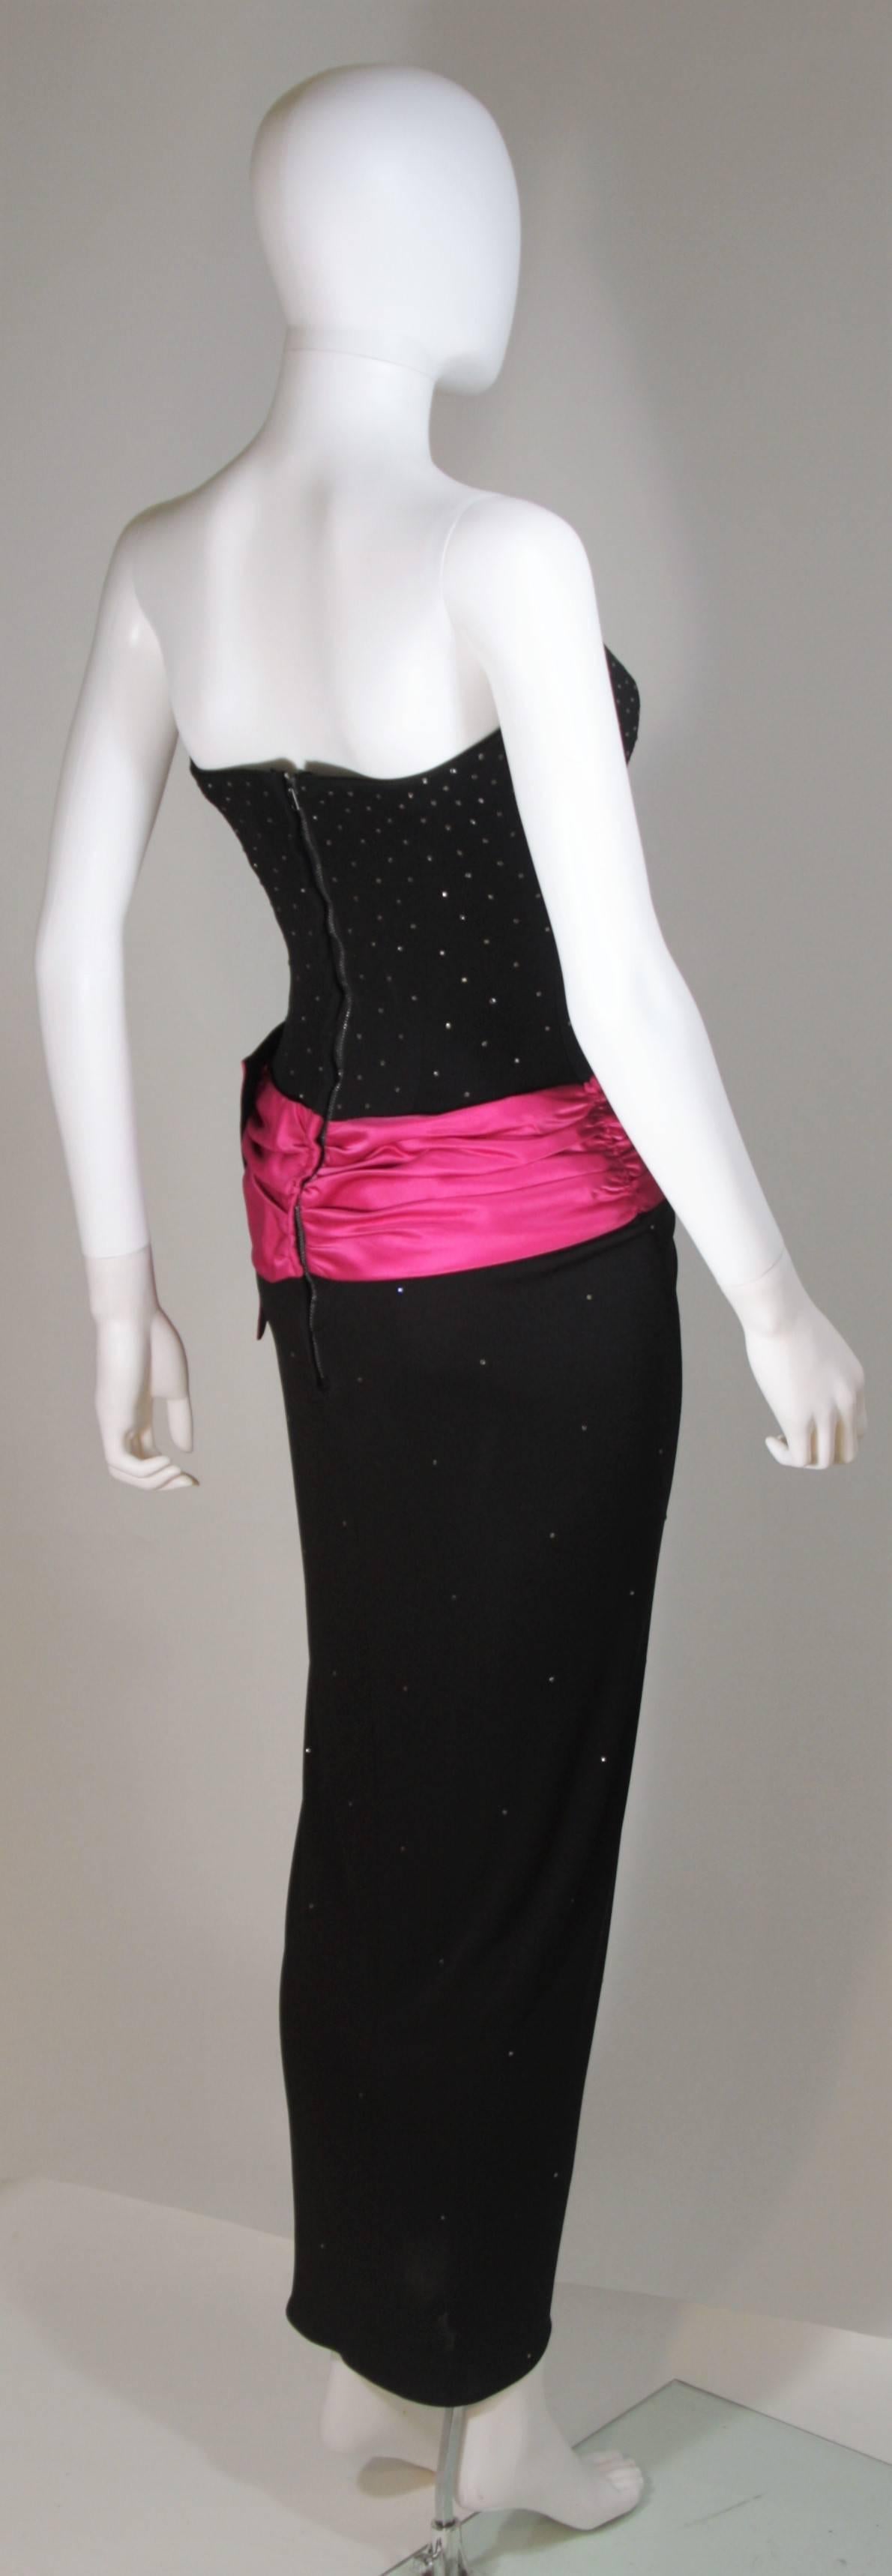 TRACEY MILLS 1980's Black Gown with Magenta Contrast and Large Bow Size 4-6 For Sale 2